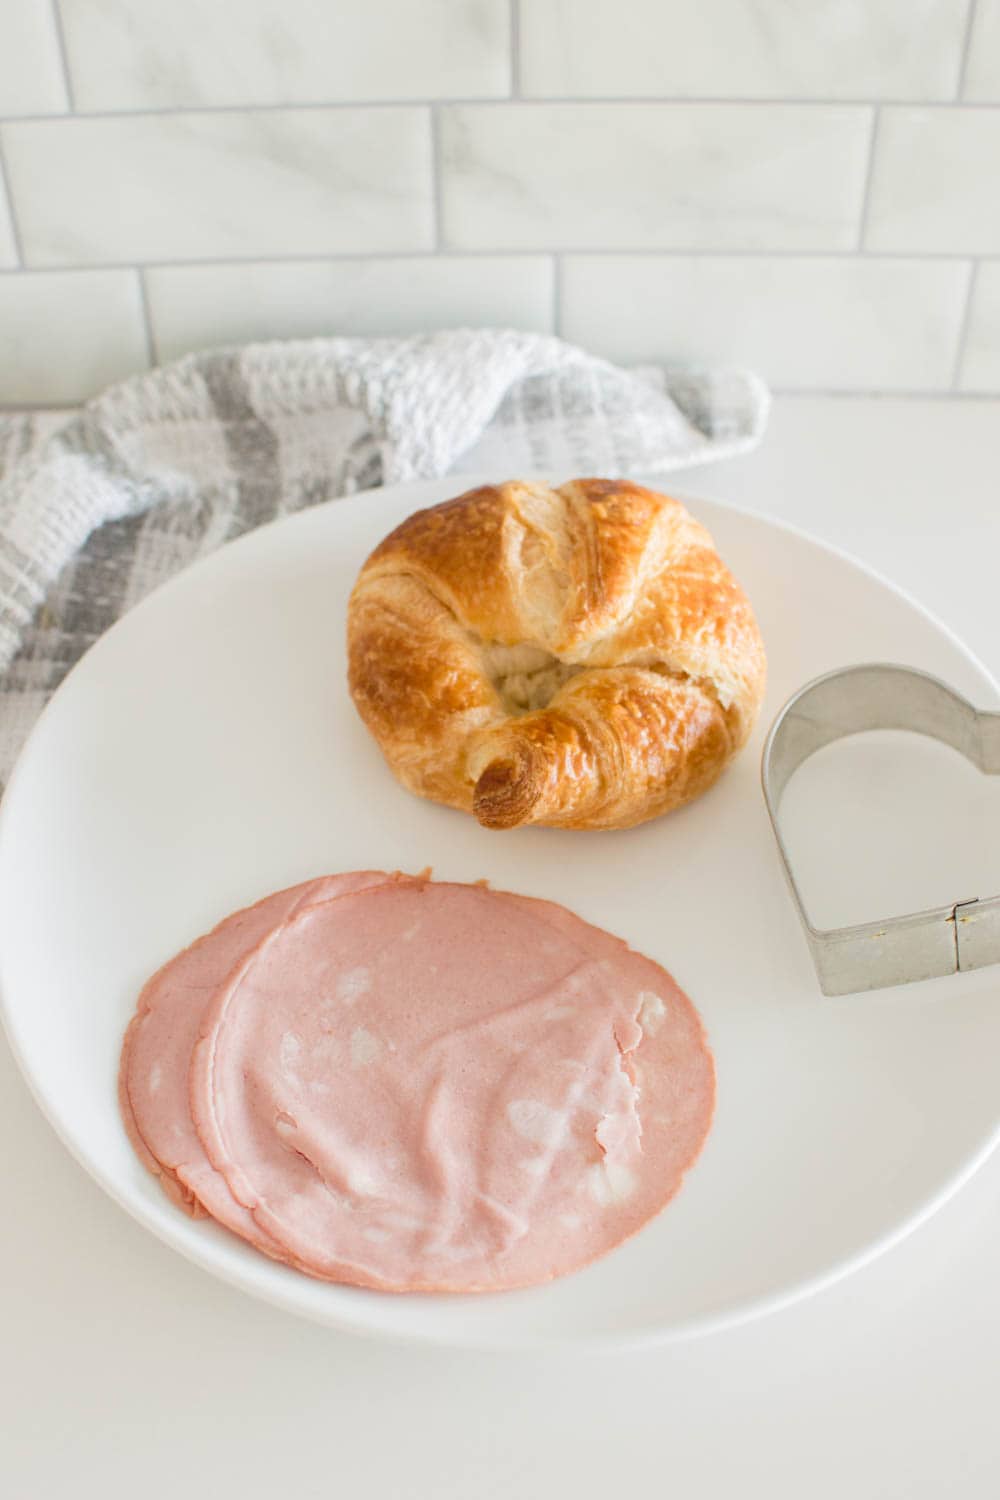 Luncheon meat, a croissant and a cookie cutter sitting on a white plate